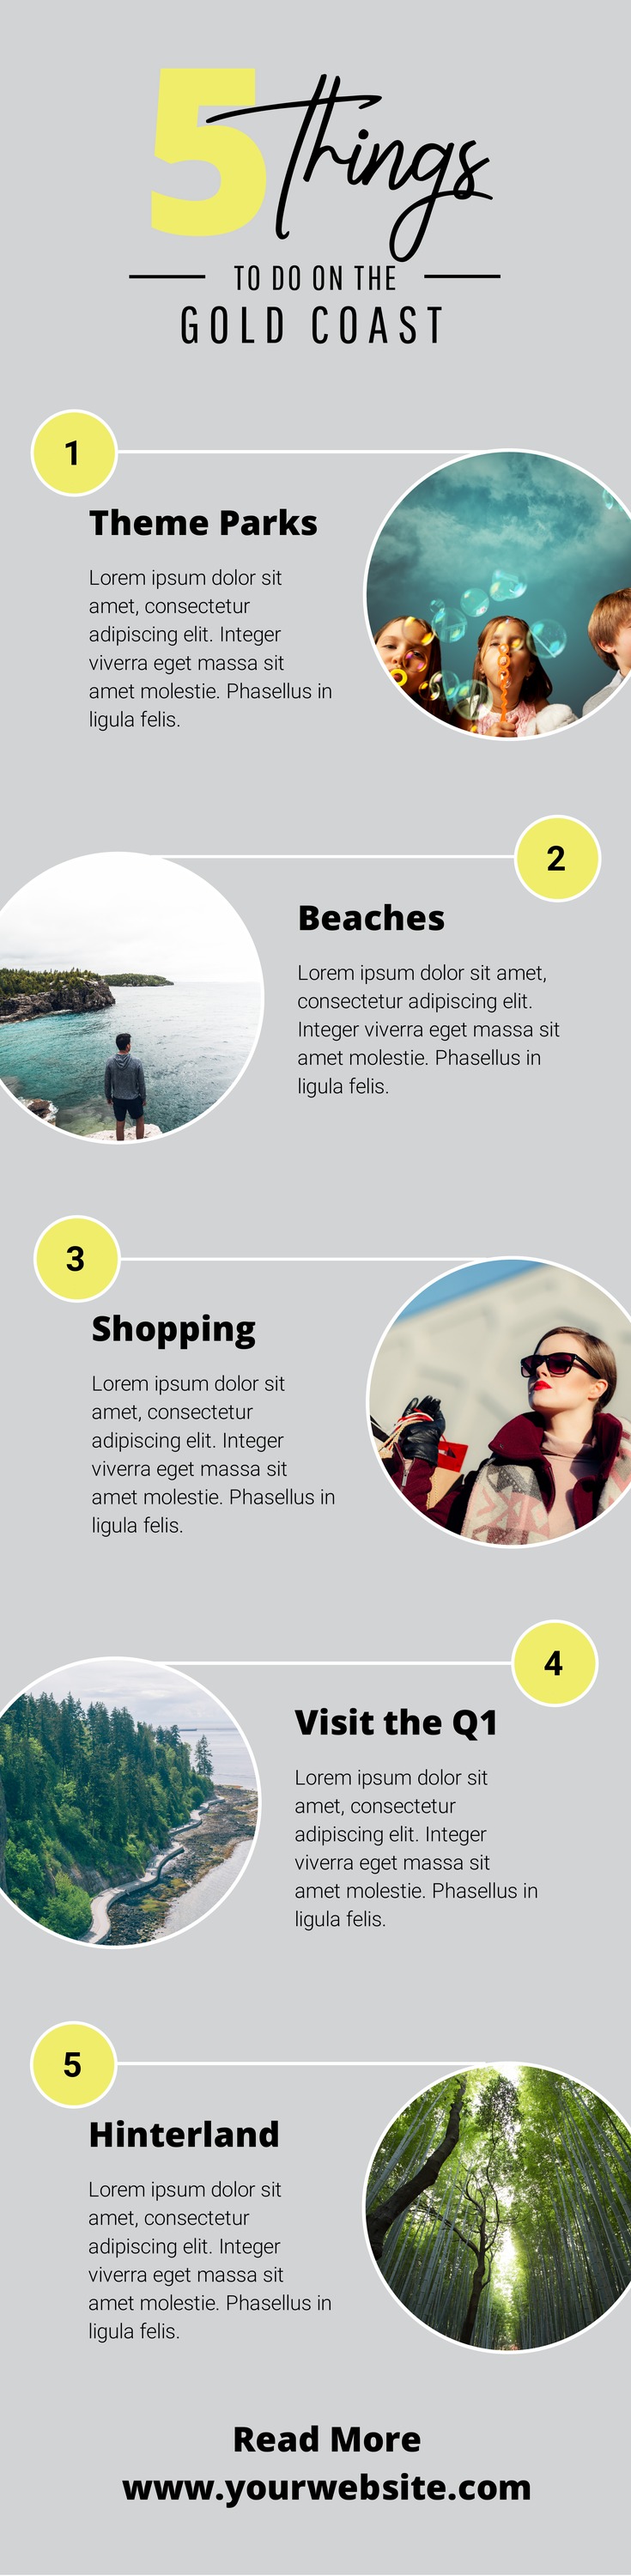 5 Things to do on the Gold Coast - Travel Themed Infographic Template